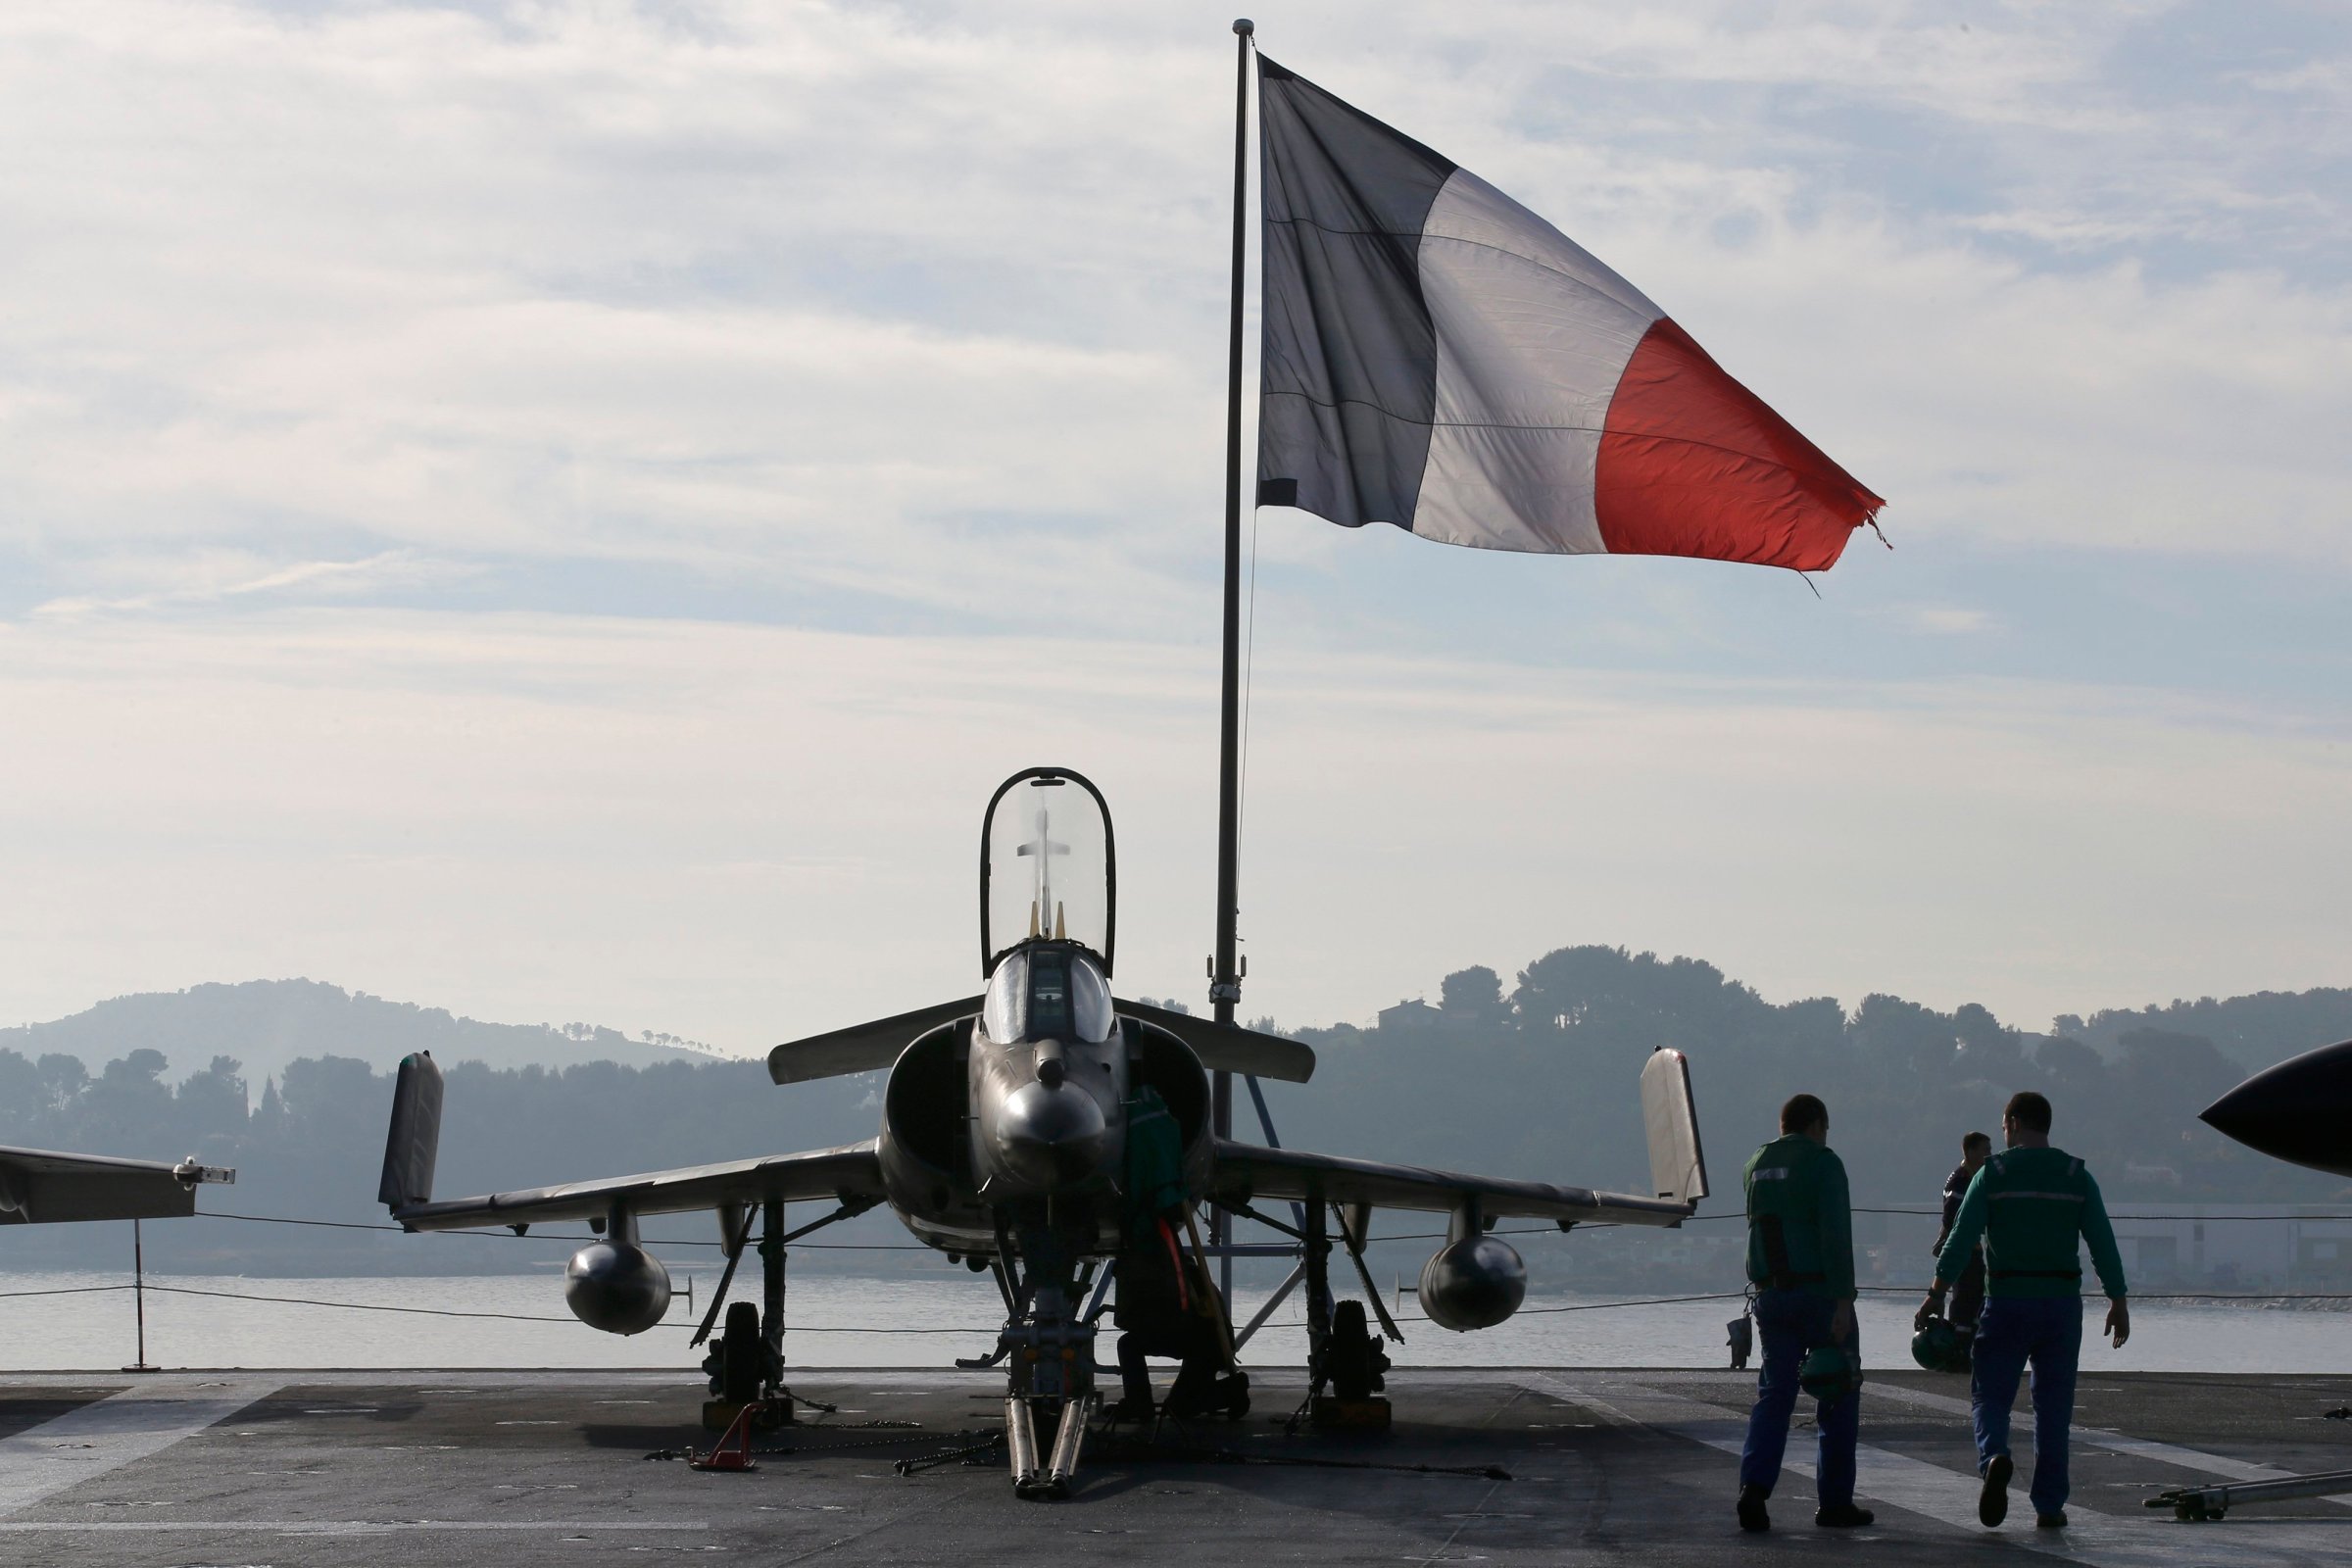 Flight deck crew work around a Super Etendard fighter jet as a French flag flies aboard the French nuclear-powered aircraft carrier Charles de Gaulle before its departure from the naval base of Toulon